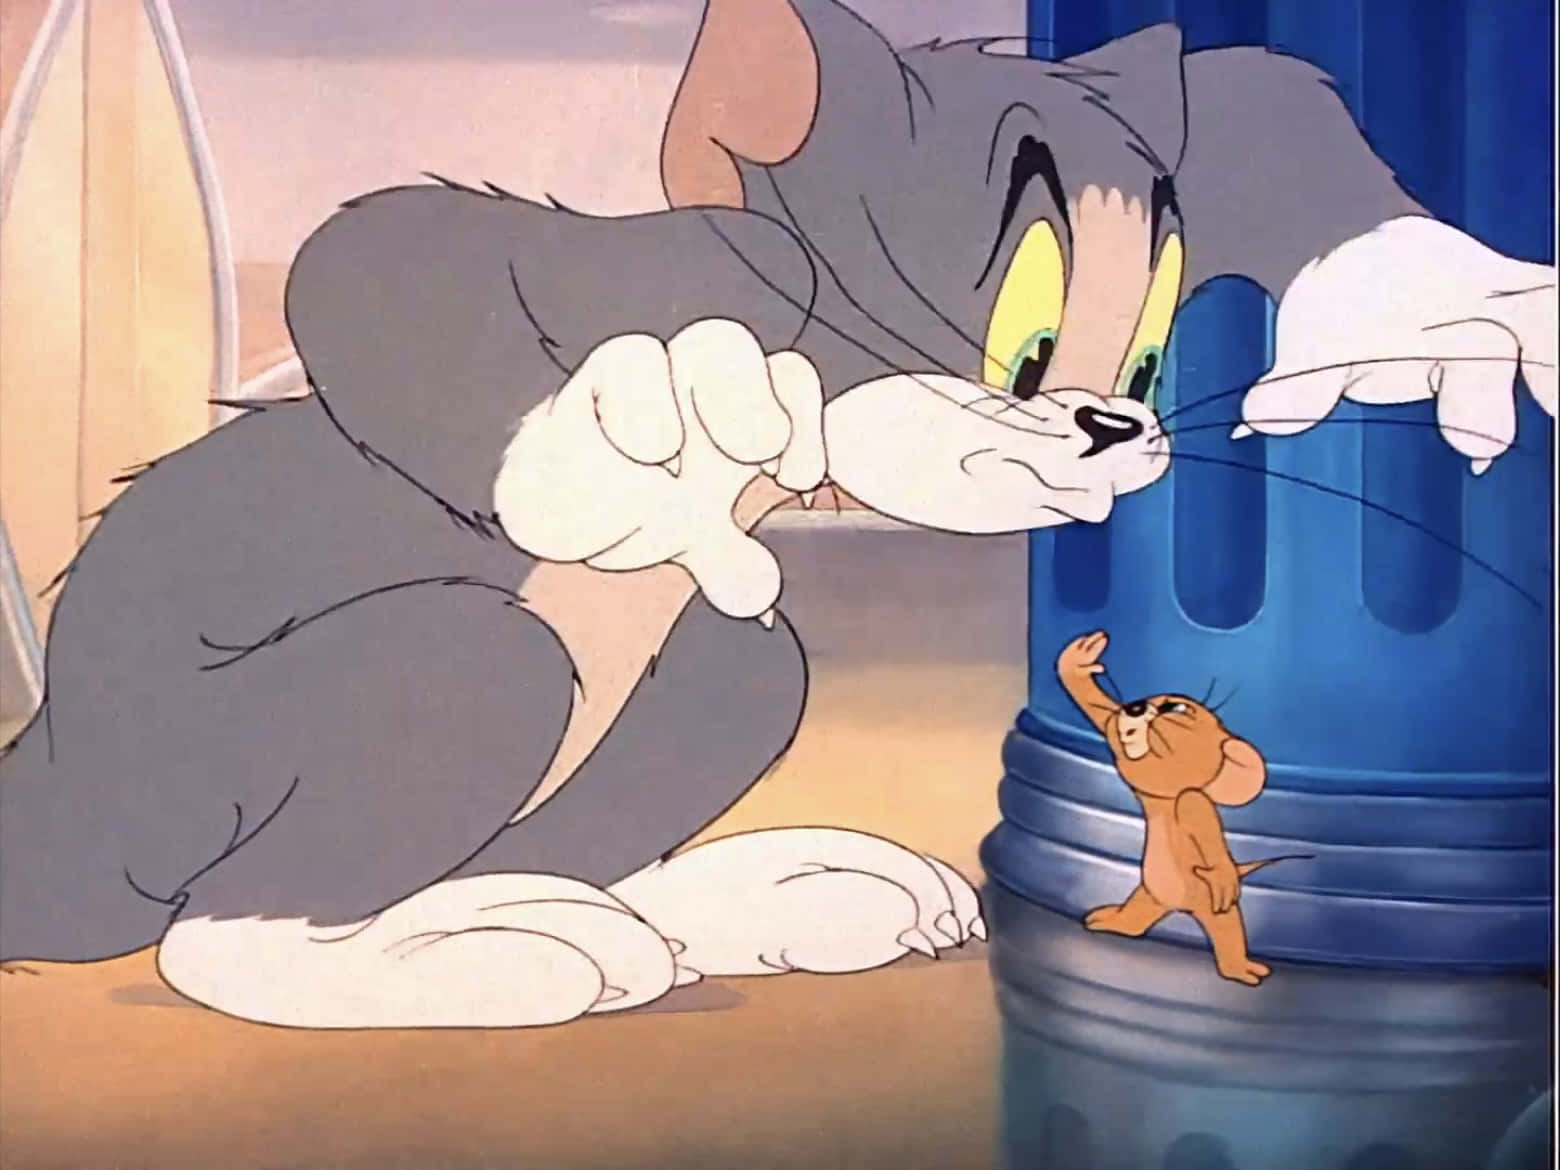 Laughter Ahead: Tom and Jerry's Hilarious Antics Wallpaper